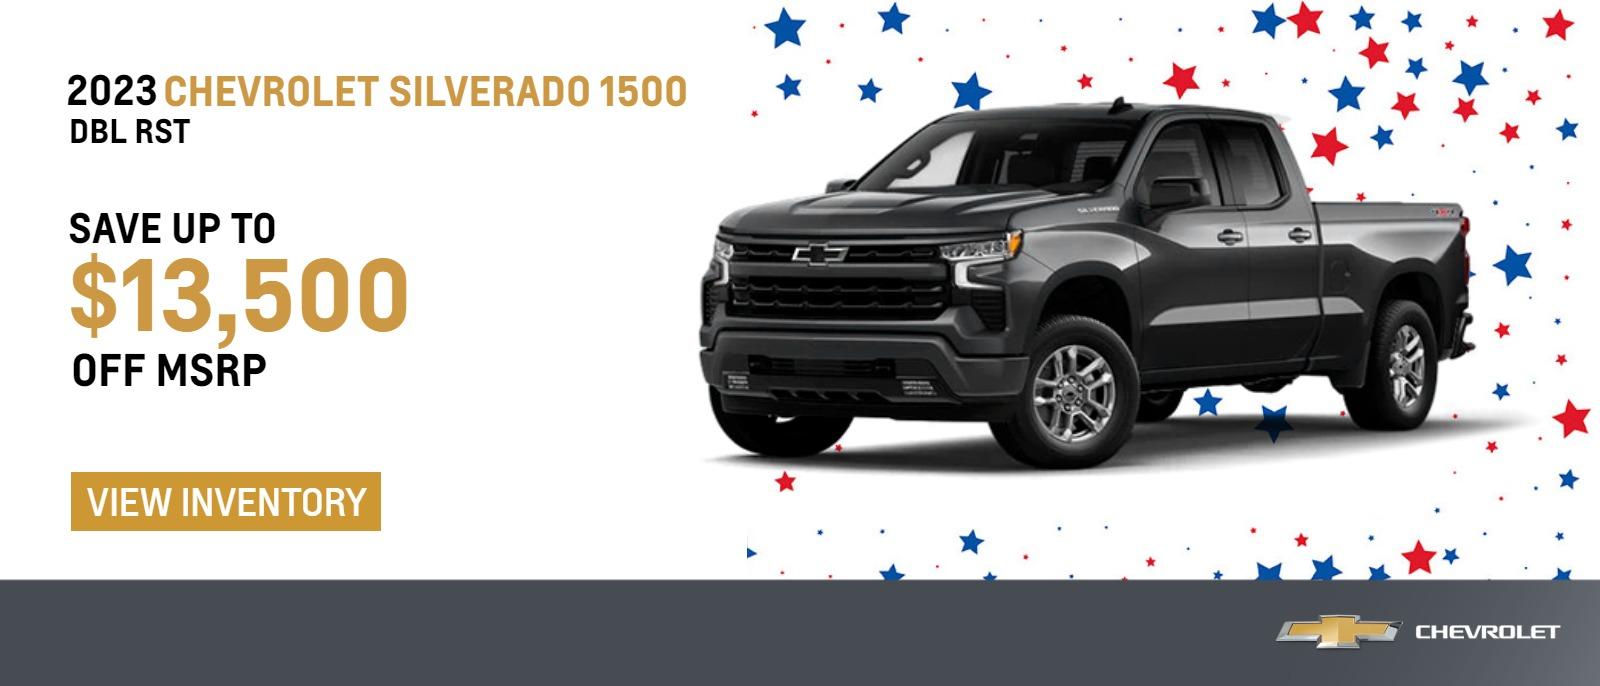 2023 Chevrolet Silverado 1500 DBL RST

Save up to $13,500 OFF MSRP